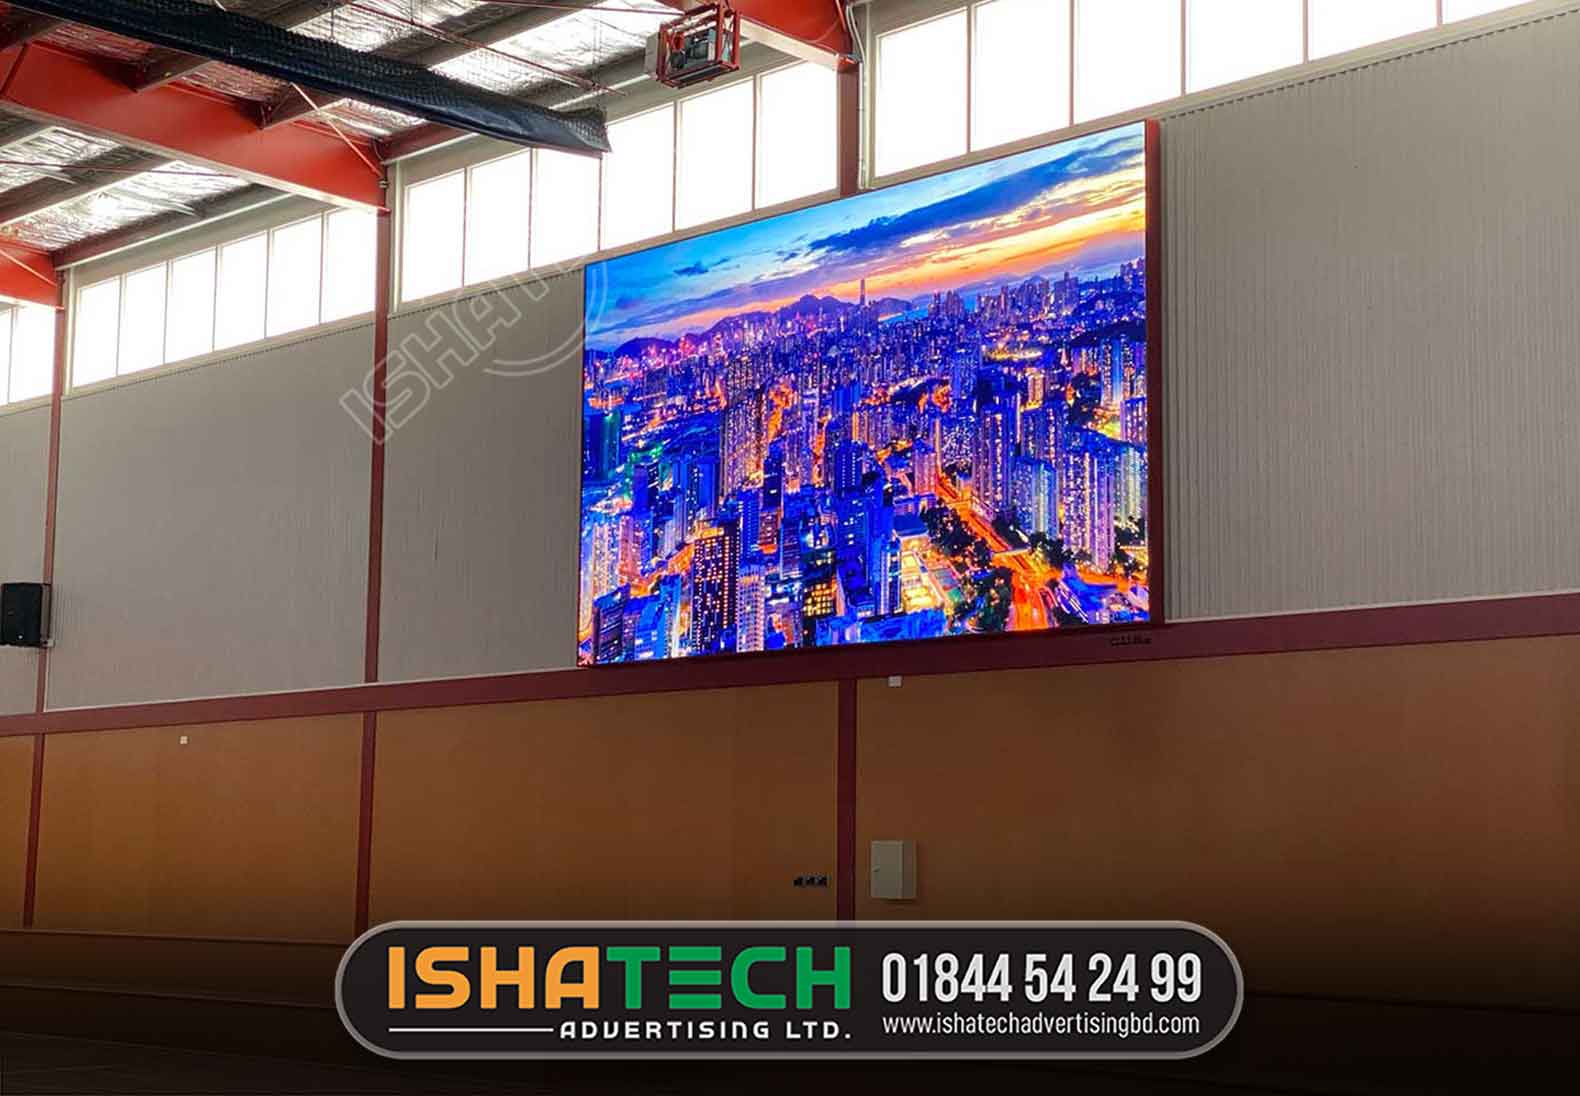 LED Display/LED Screen/3D LED Fan/LED cube/led ball/led poster/Soft led. Big stock Intelligent digital poster LED display to worldwide P1.75mm P2mm and P2.5 for choice! Any combination as you want! Intelligent mobile app control; Smart remote and group management; Both indoor and outdoor; Both hanging and standing; Plug and display, zero set-up, Size can be customize base on the module size! Welcome to negotiate with us！ Support OEM and ODM Wechat/Whatsapp/Skype:+86 13421388781 #leds #ledlights #ledsigns #ledwalls #leddisplays #ledvideowalls #ledscreens #digitalsignage #videotrons #pantallas #pantallasled #media #ekraed #leddisplej #ledkijelző #ledディスプレイ #Retail #RMFHLED #RM #ledfal #LEDDisplay #LEDScreen #LEDsigns #monitorLED #จอโฆษณาLED #ป้ายไฟLED #LEDmodule led screen don't only display square image